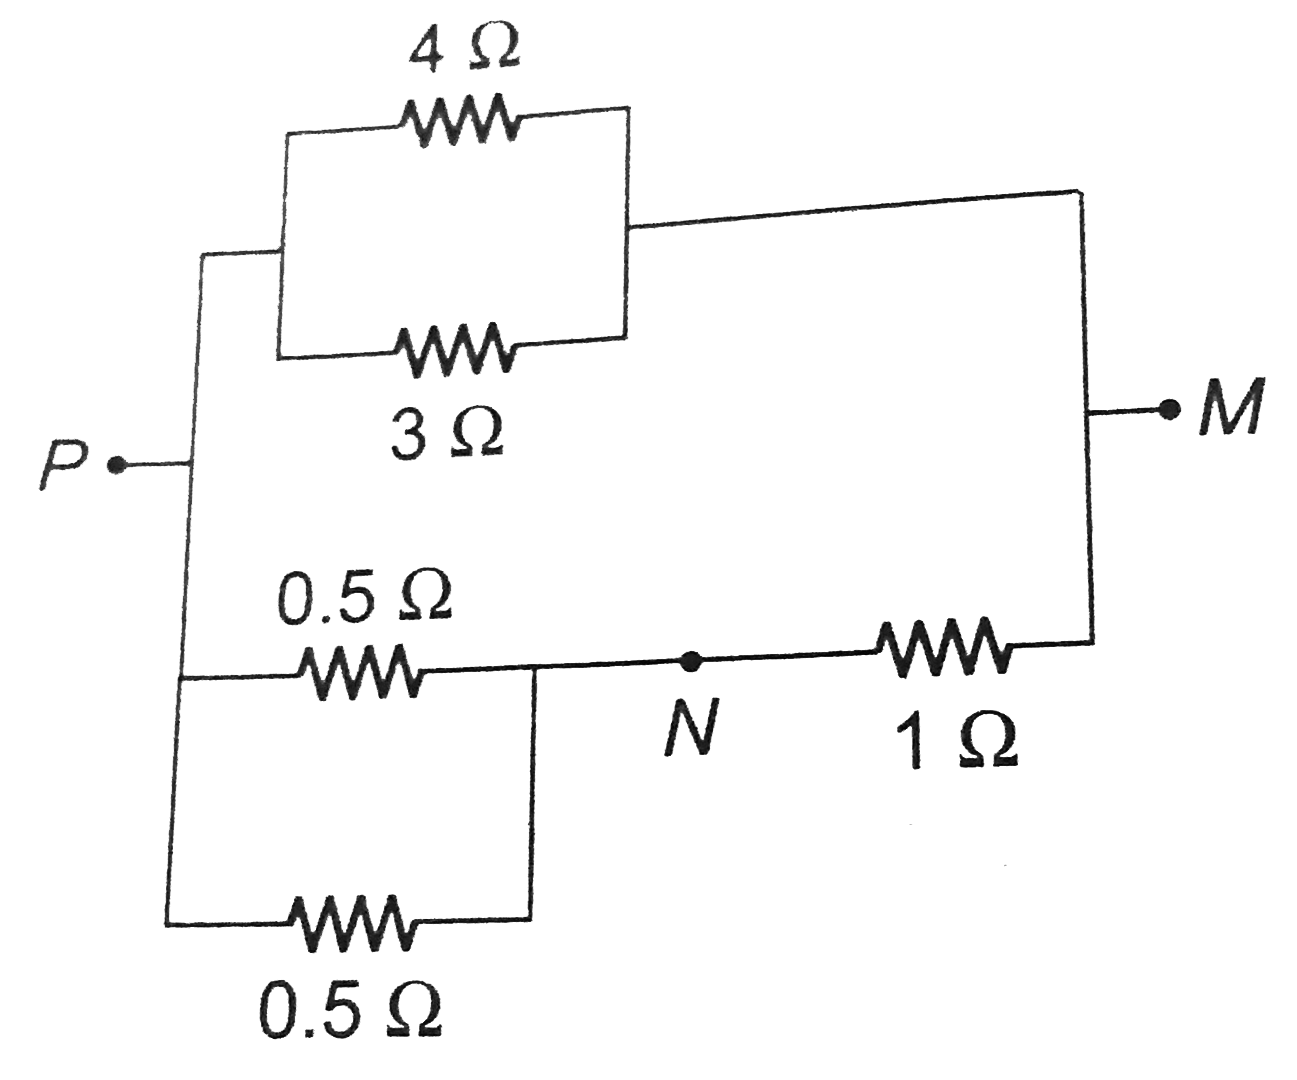 In the circuit shown, the current through the 4 Omega resistors is 1 amp when the points P and M are connected to a dc voltage source. The potential difference between the points M and N is.   .